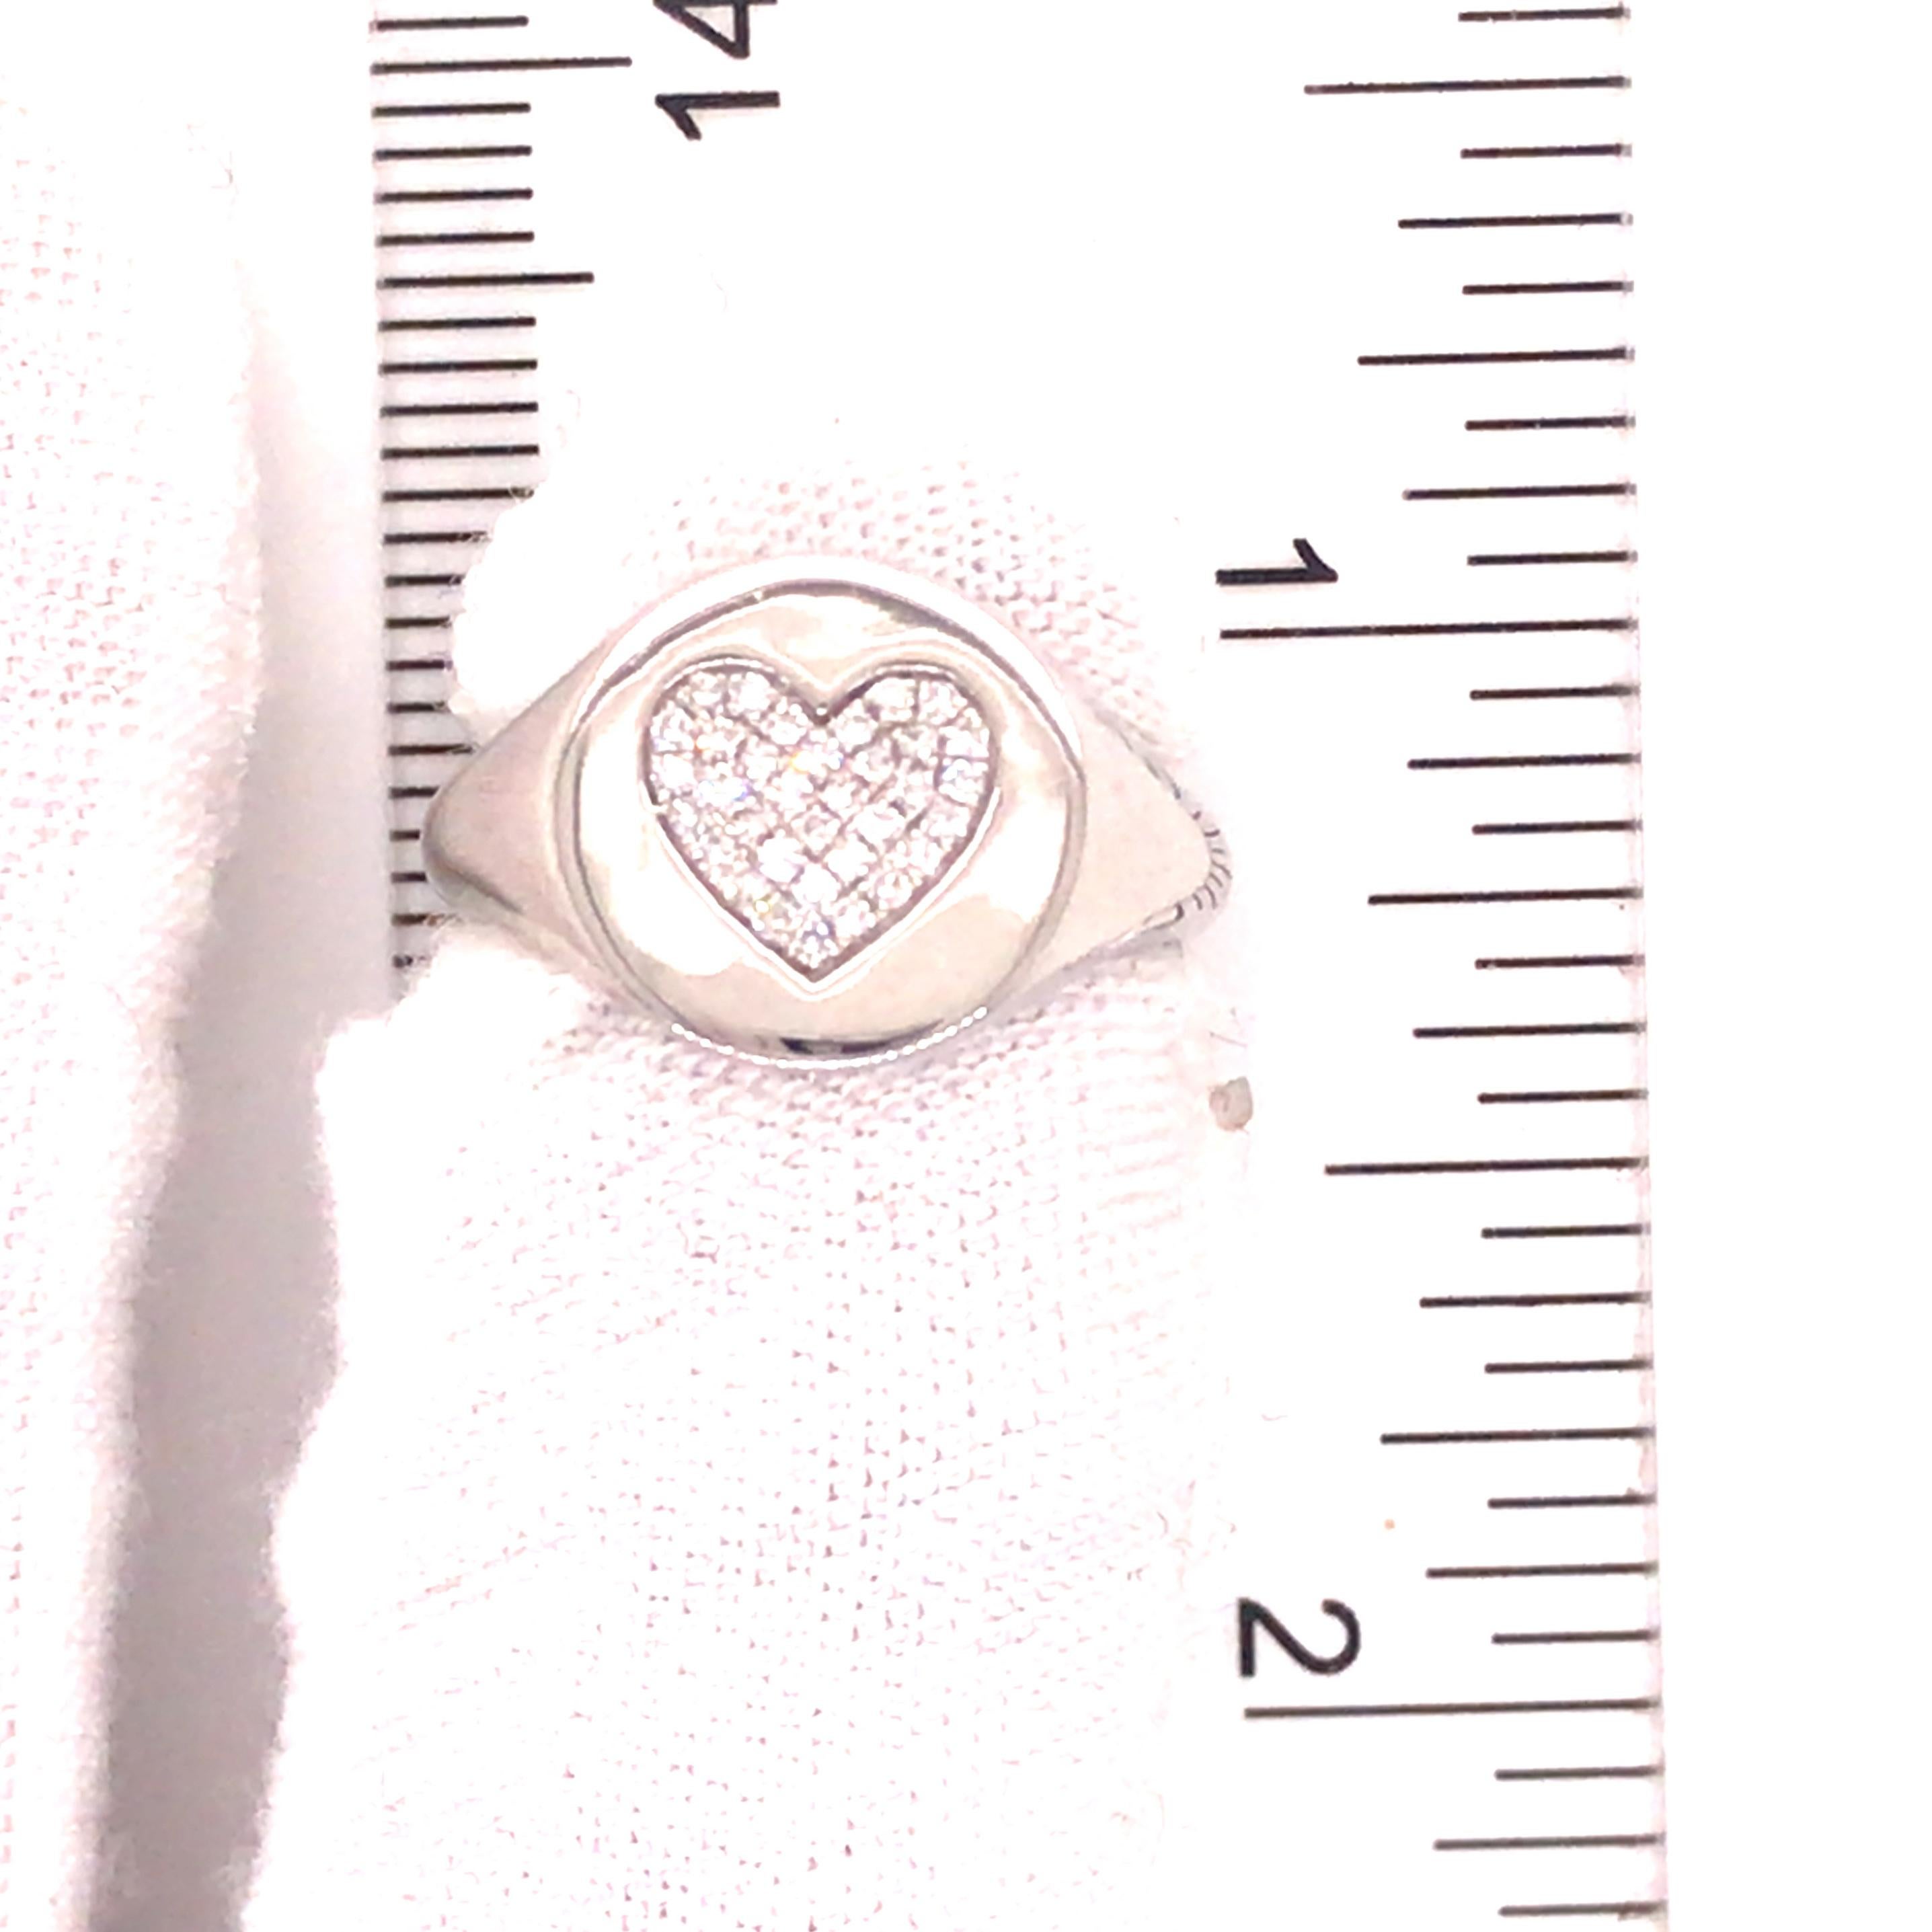 14K Diamond Pave Heart Signet Pinky Ring White Gold In New Condition For Sale In Boca Raton, FL